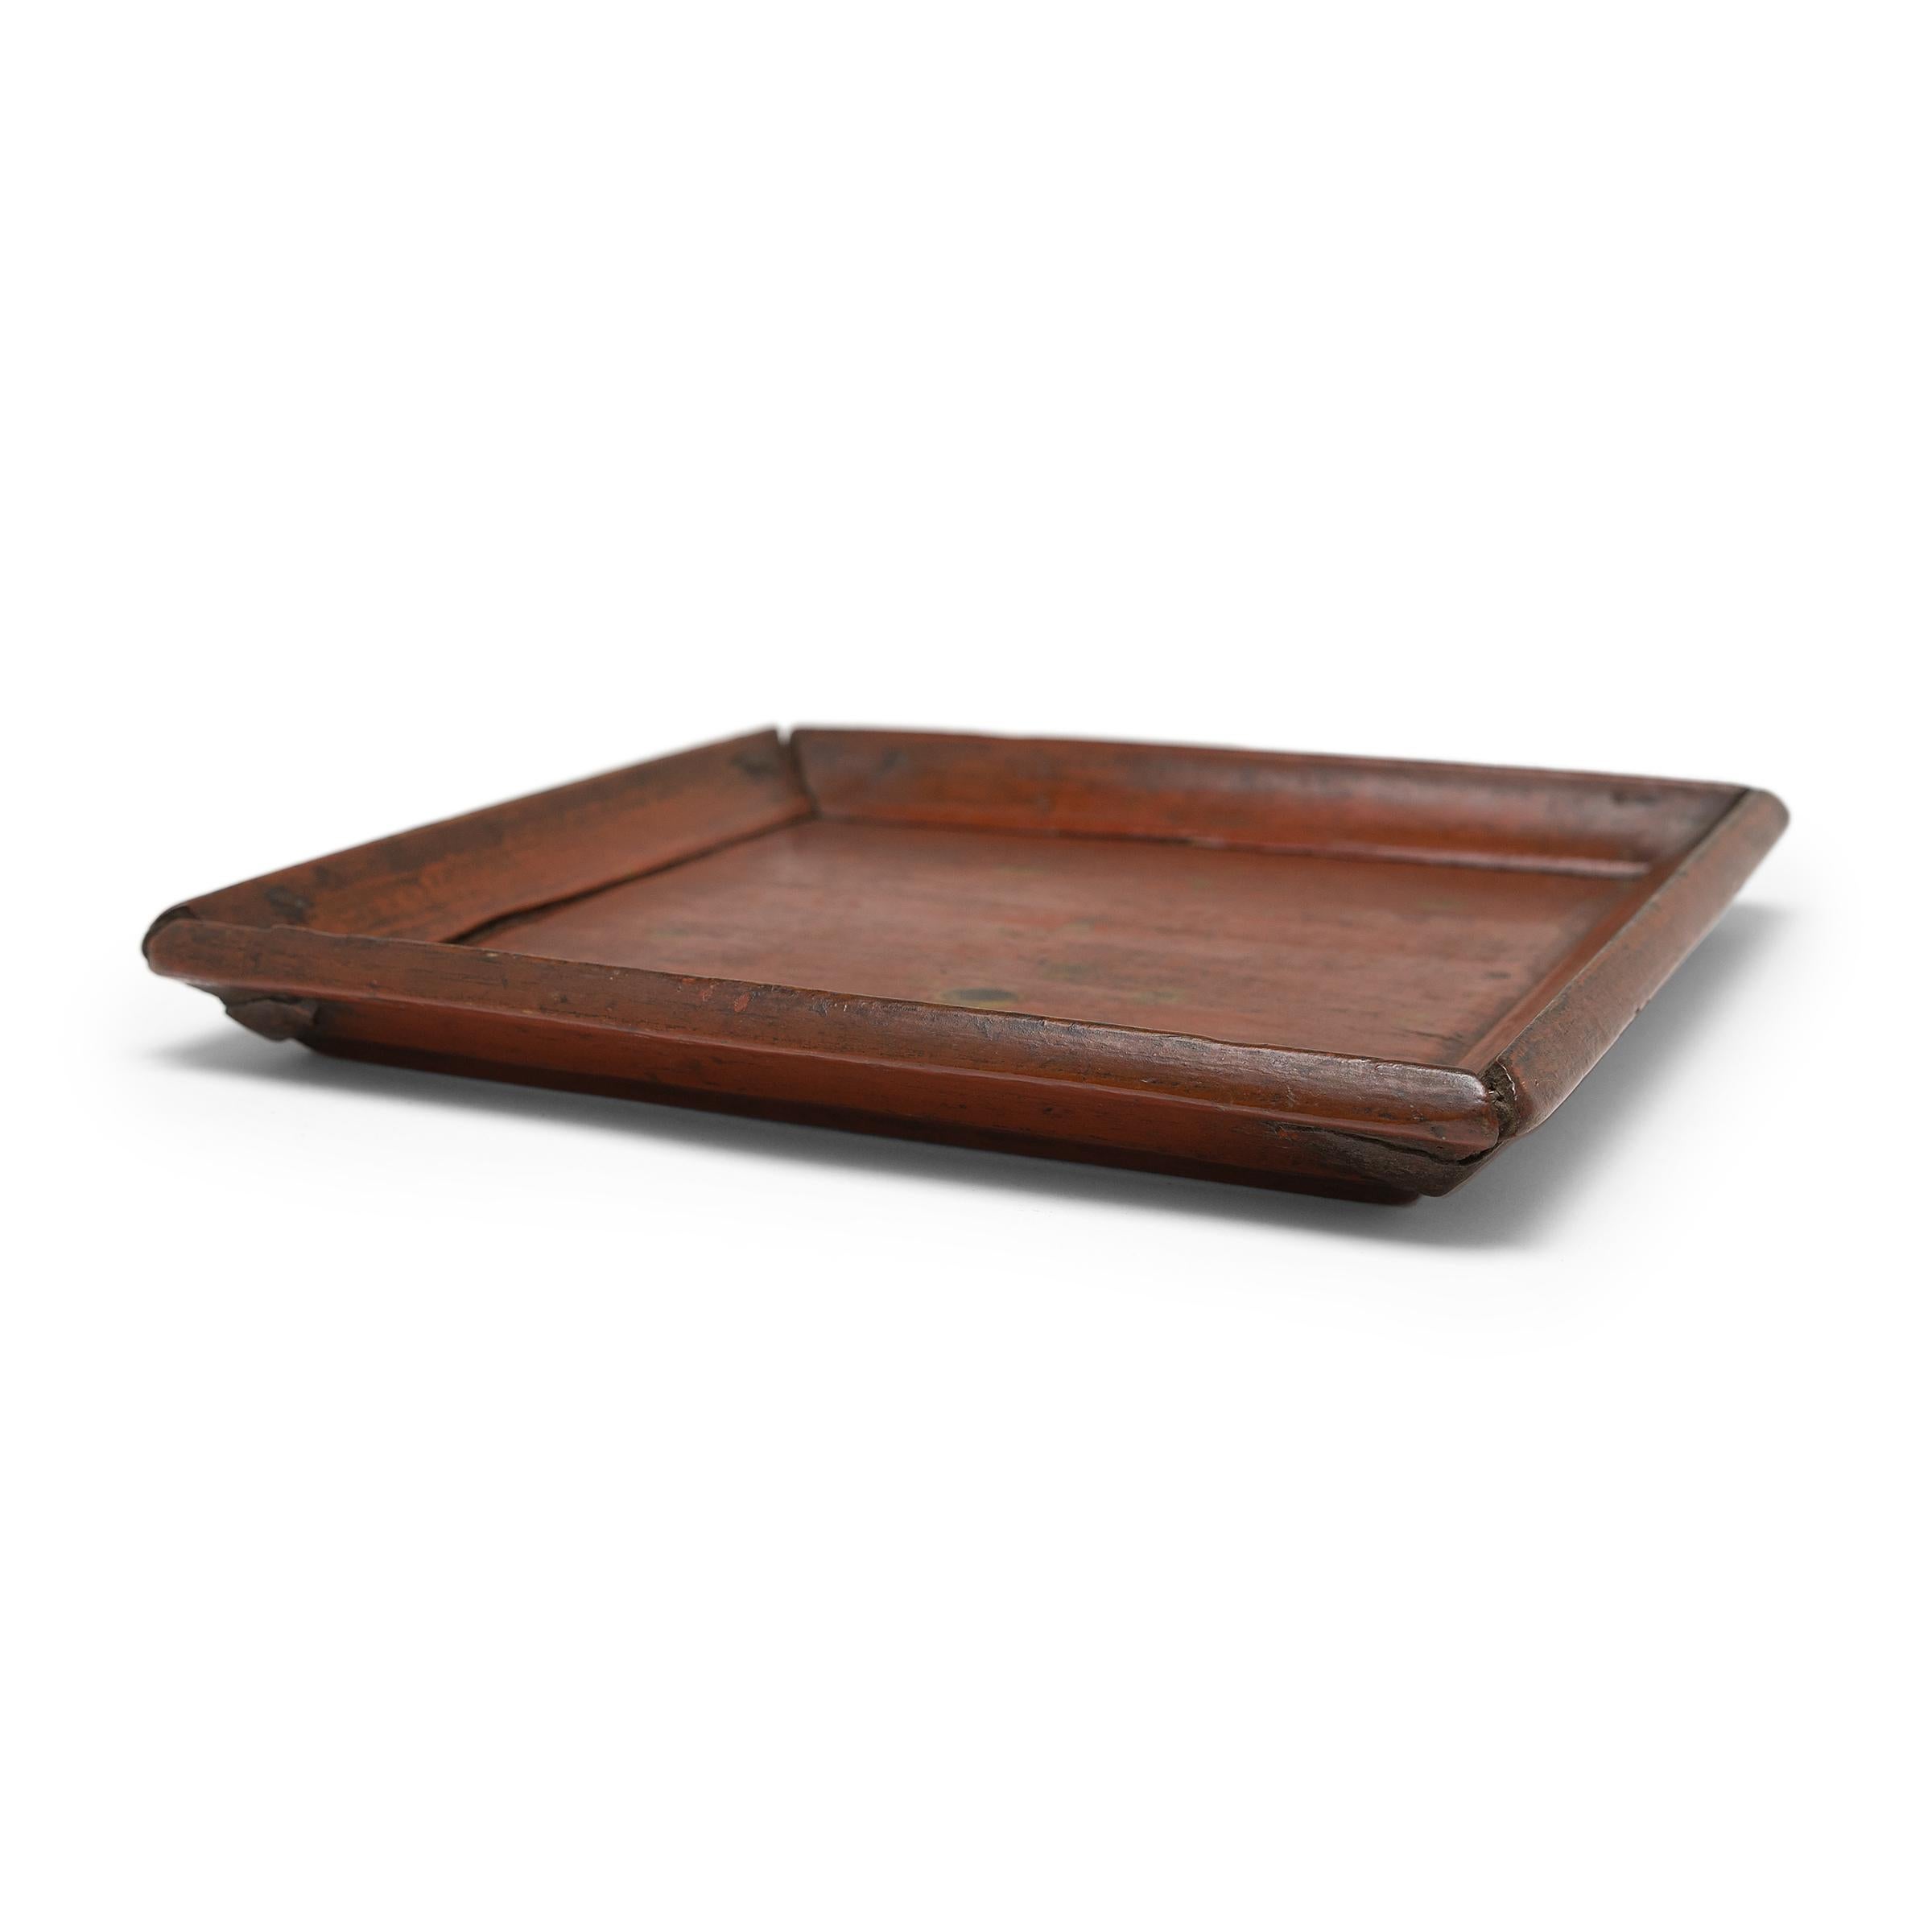 Simple lines, a modest form, and a layer of hand-brushed lacquer give this petite Qing-dynasty tray a provincial charm that recalls the warmth of home. The red lacquer finish has weathered with time slightly revealing the light brown coloring of its